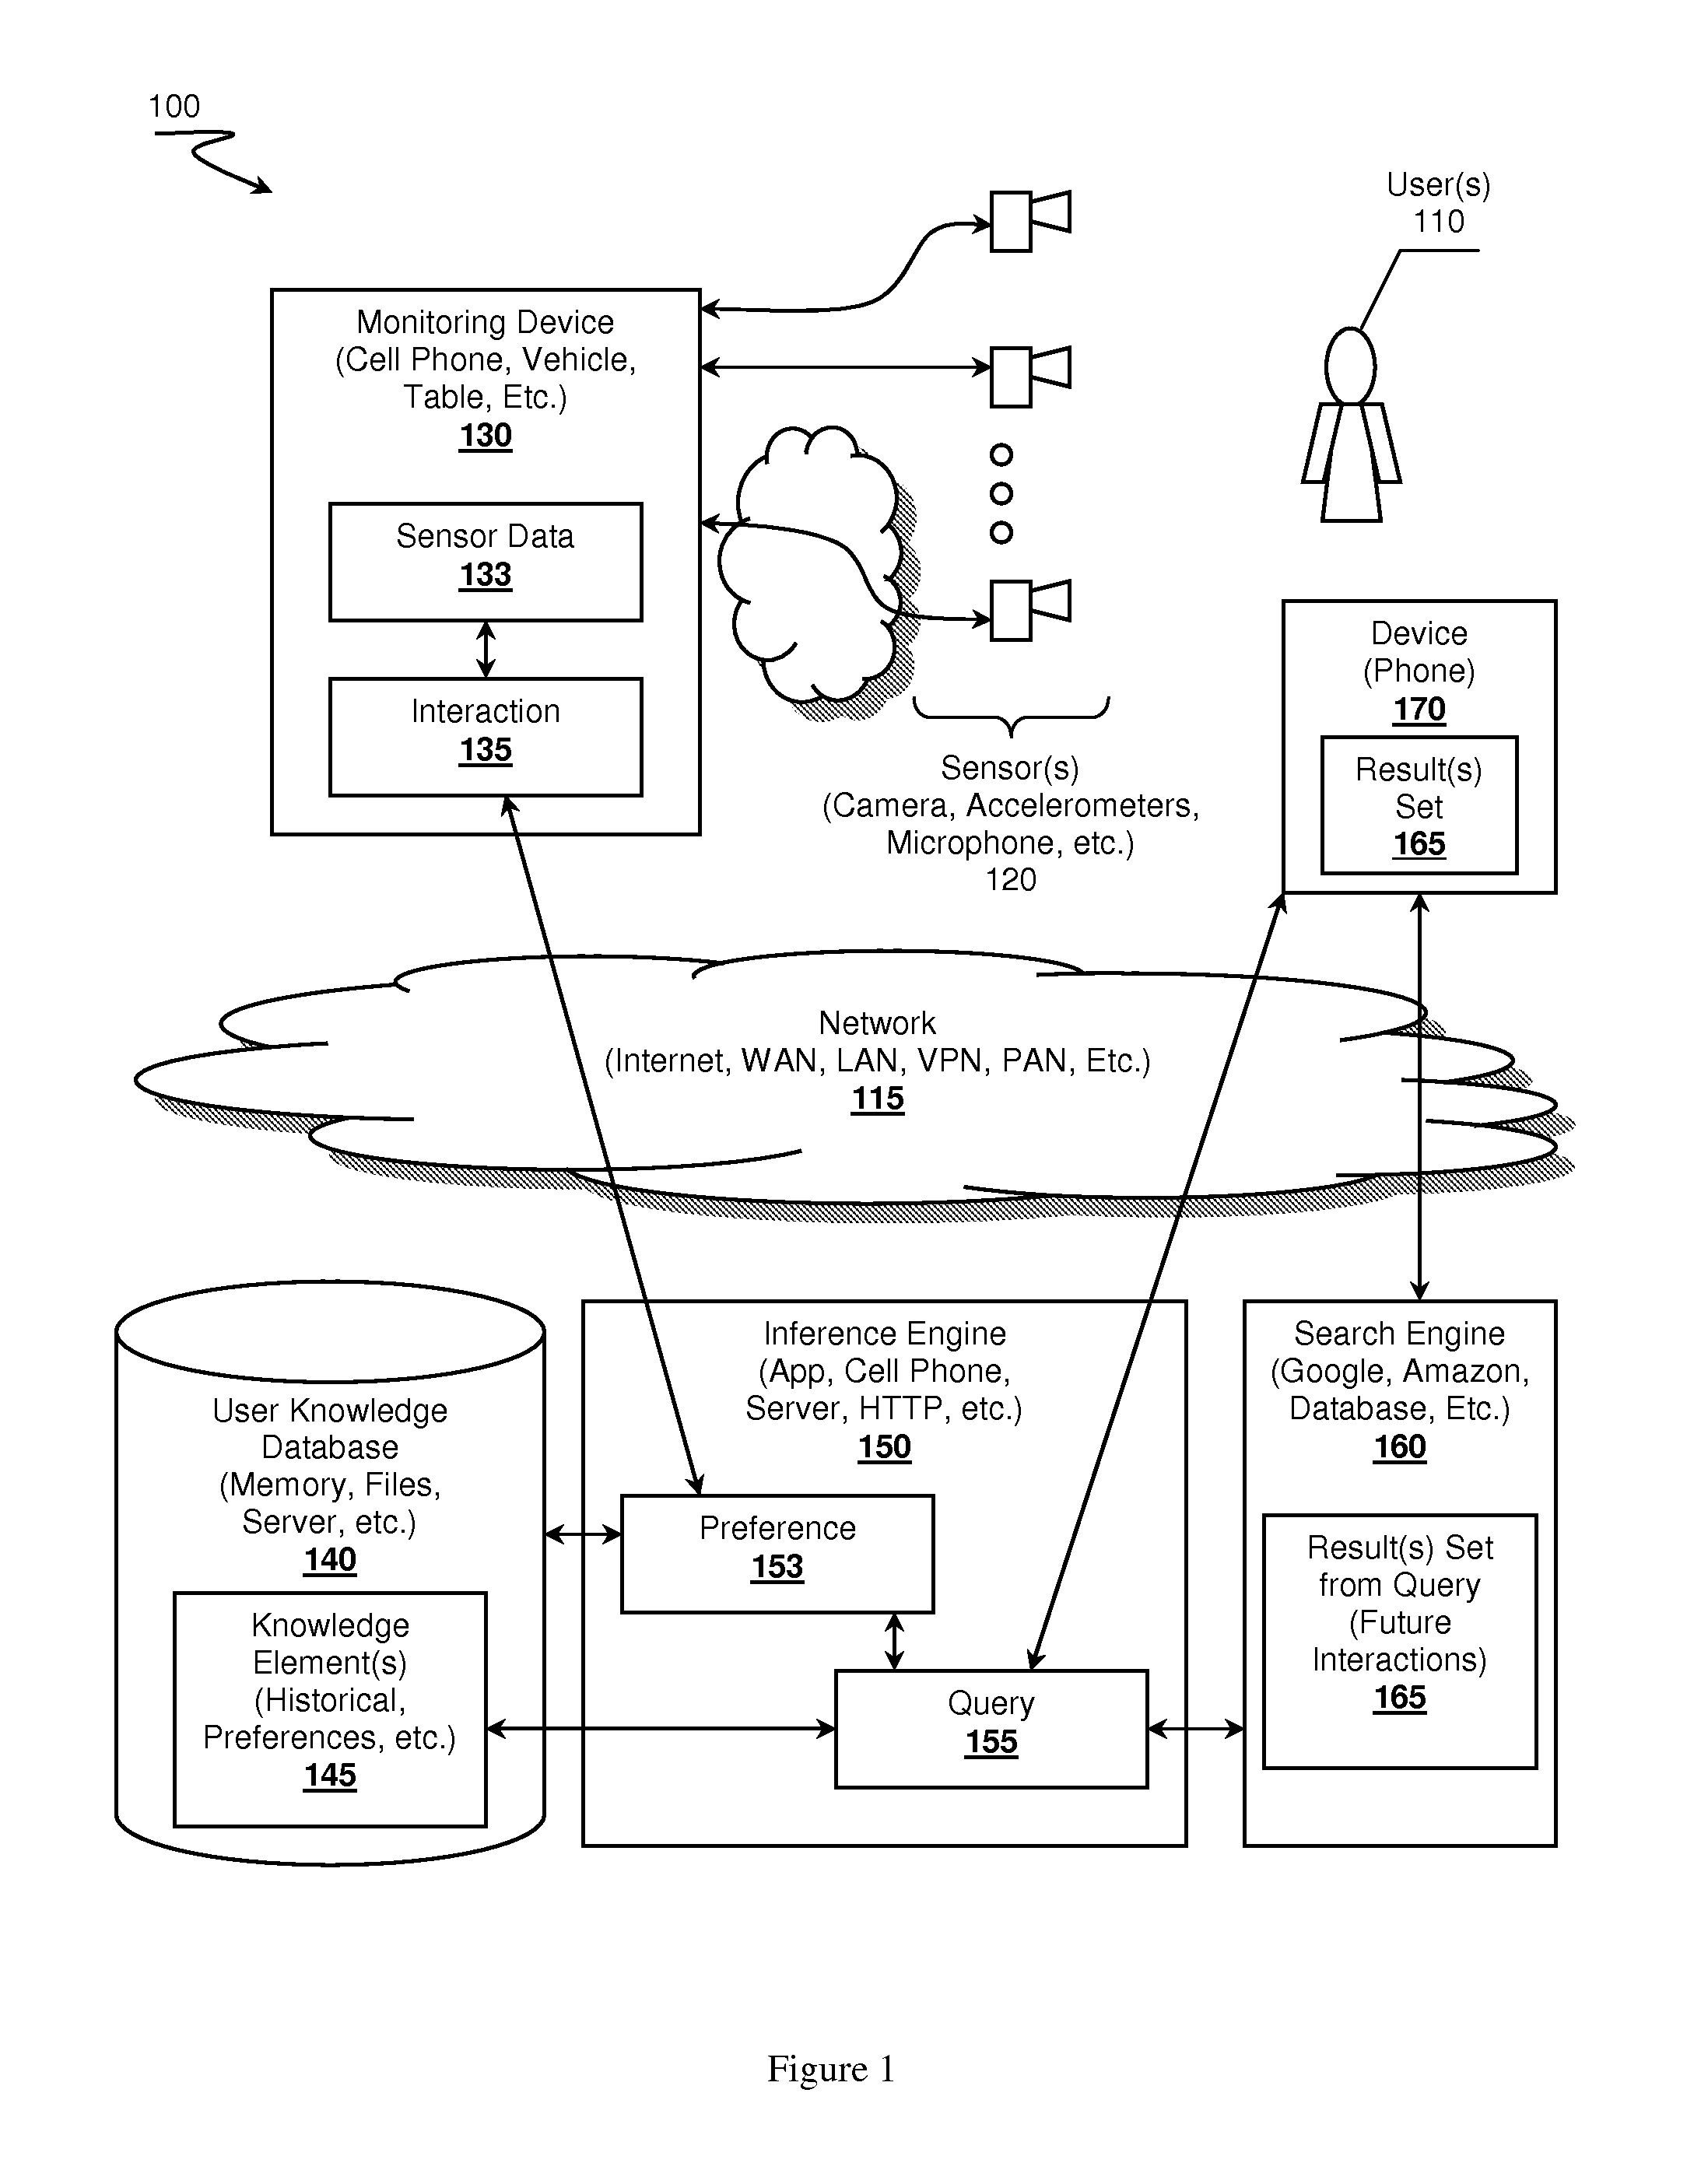 Self-learning, context aware virtual assistants, systems and methods